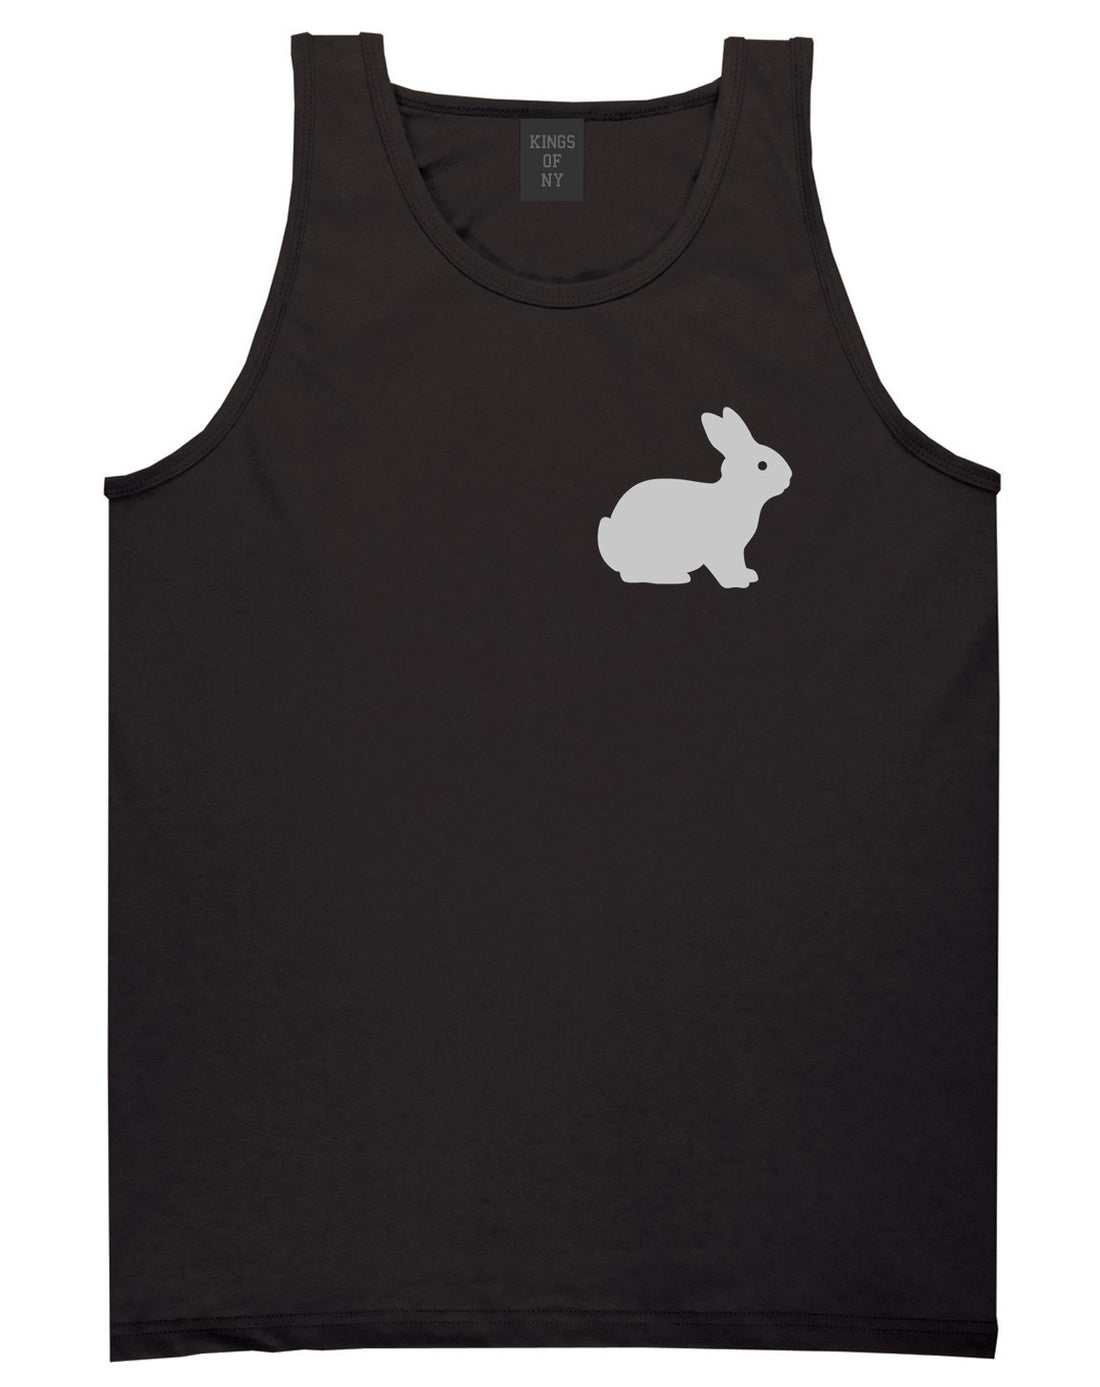 Bunny Rabbit Easter Chest Black Tank Top Shirt by Kings Of NY